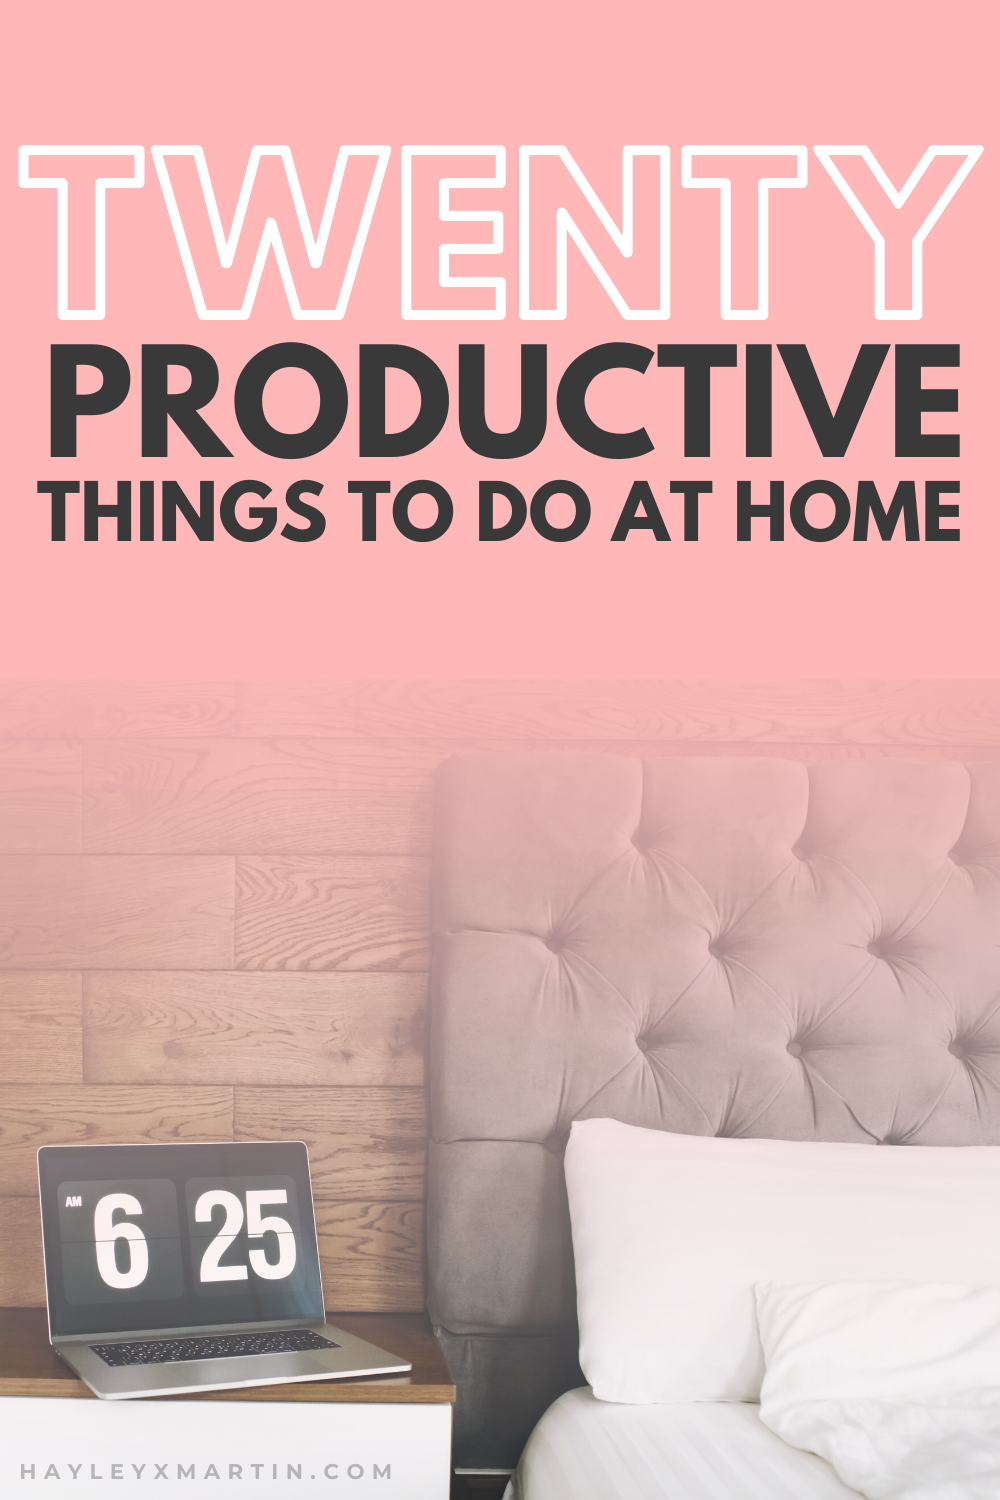 20 PRODUCTIVE THINGS TO DO AT HOME | HAYLEYXMARTIN